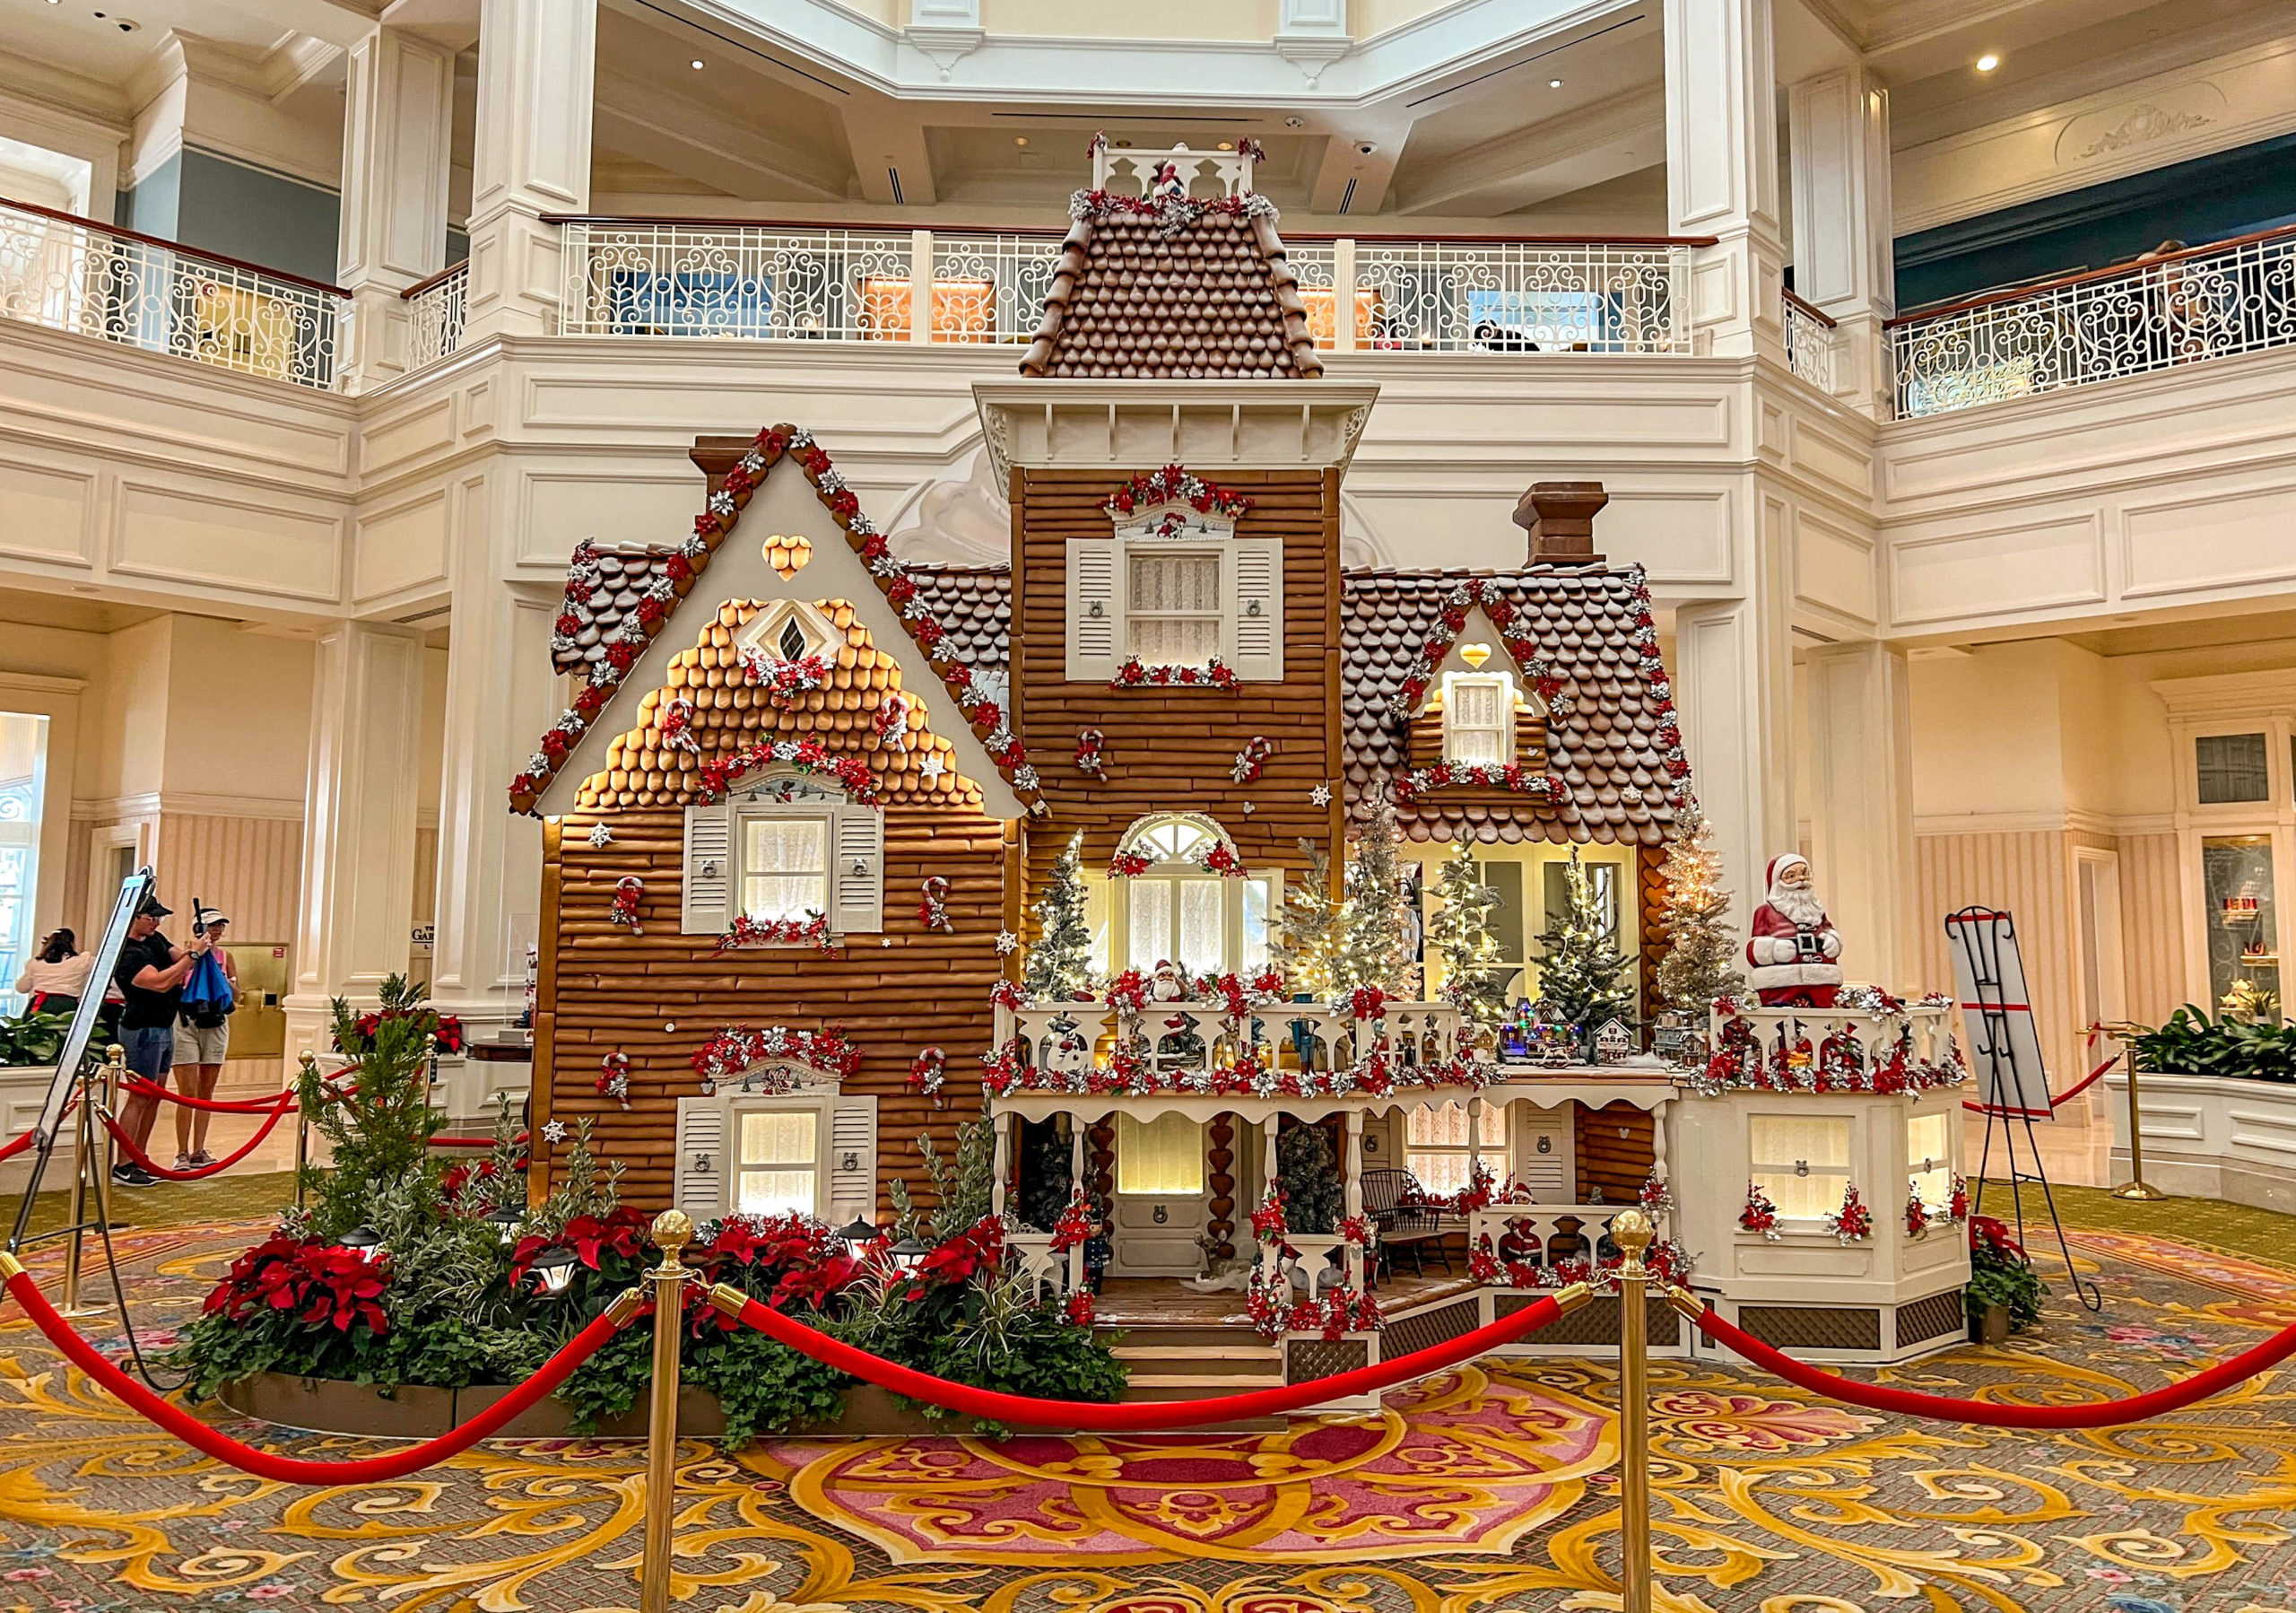 Grand Floridian gingerbread house